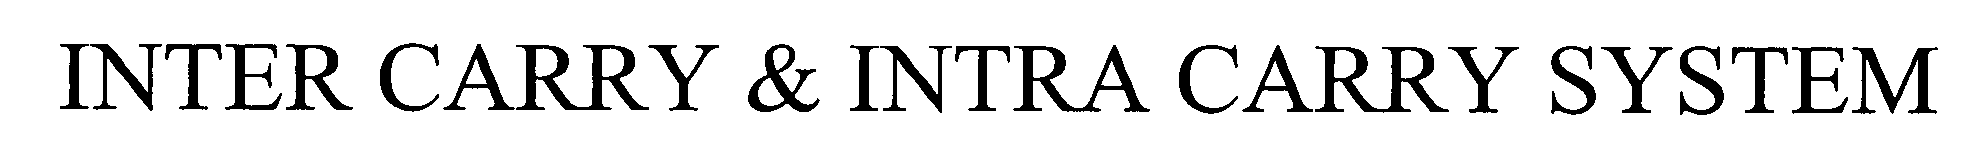 Trademark Logo INTER CARRY & INTRA CARRY SYSTEM